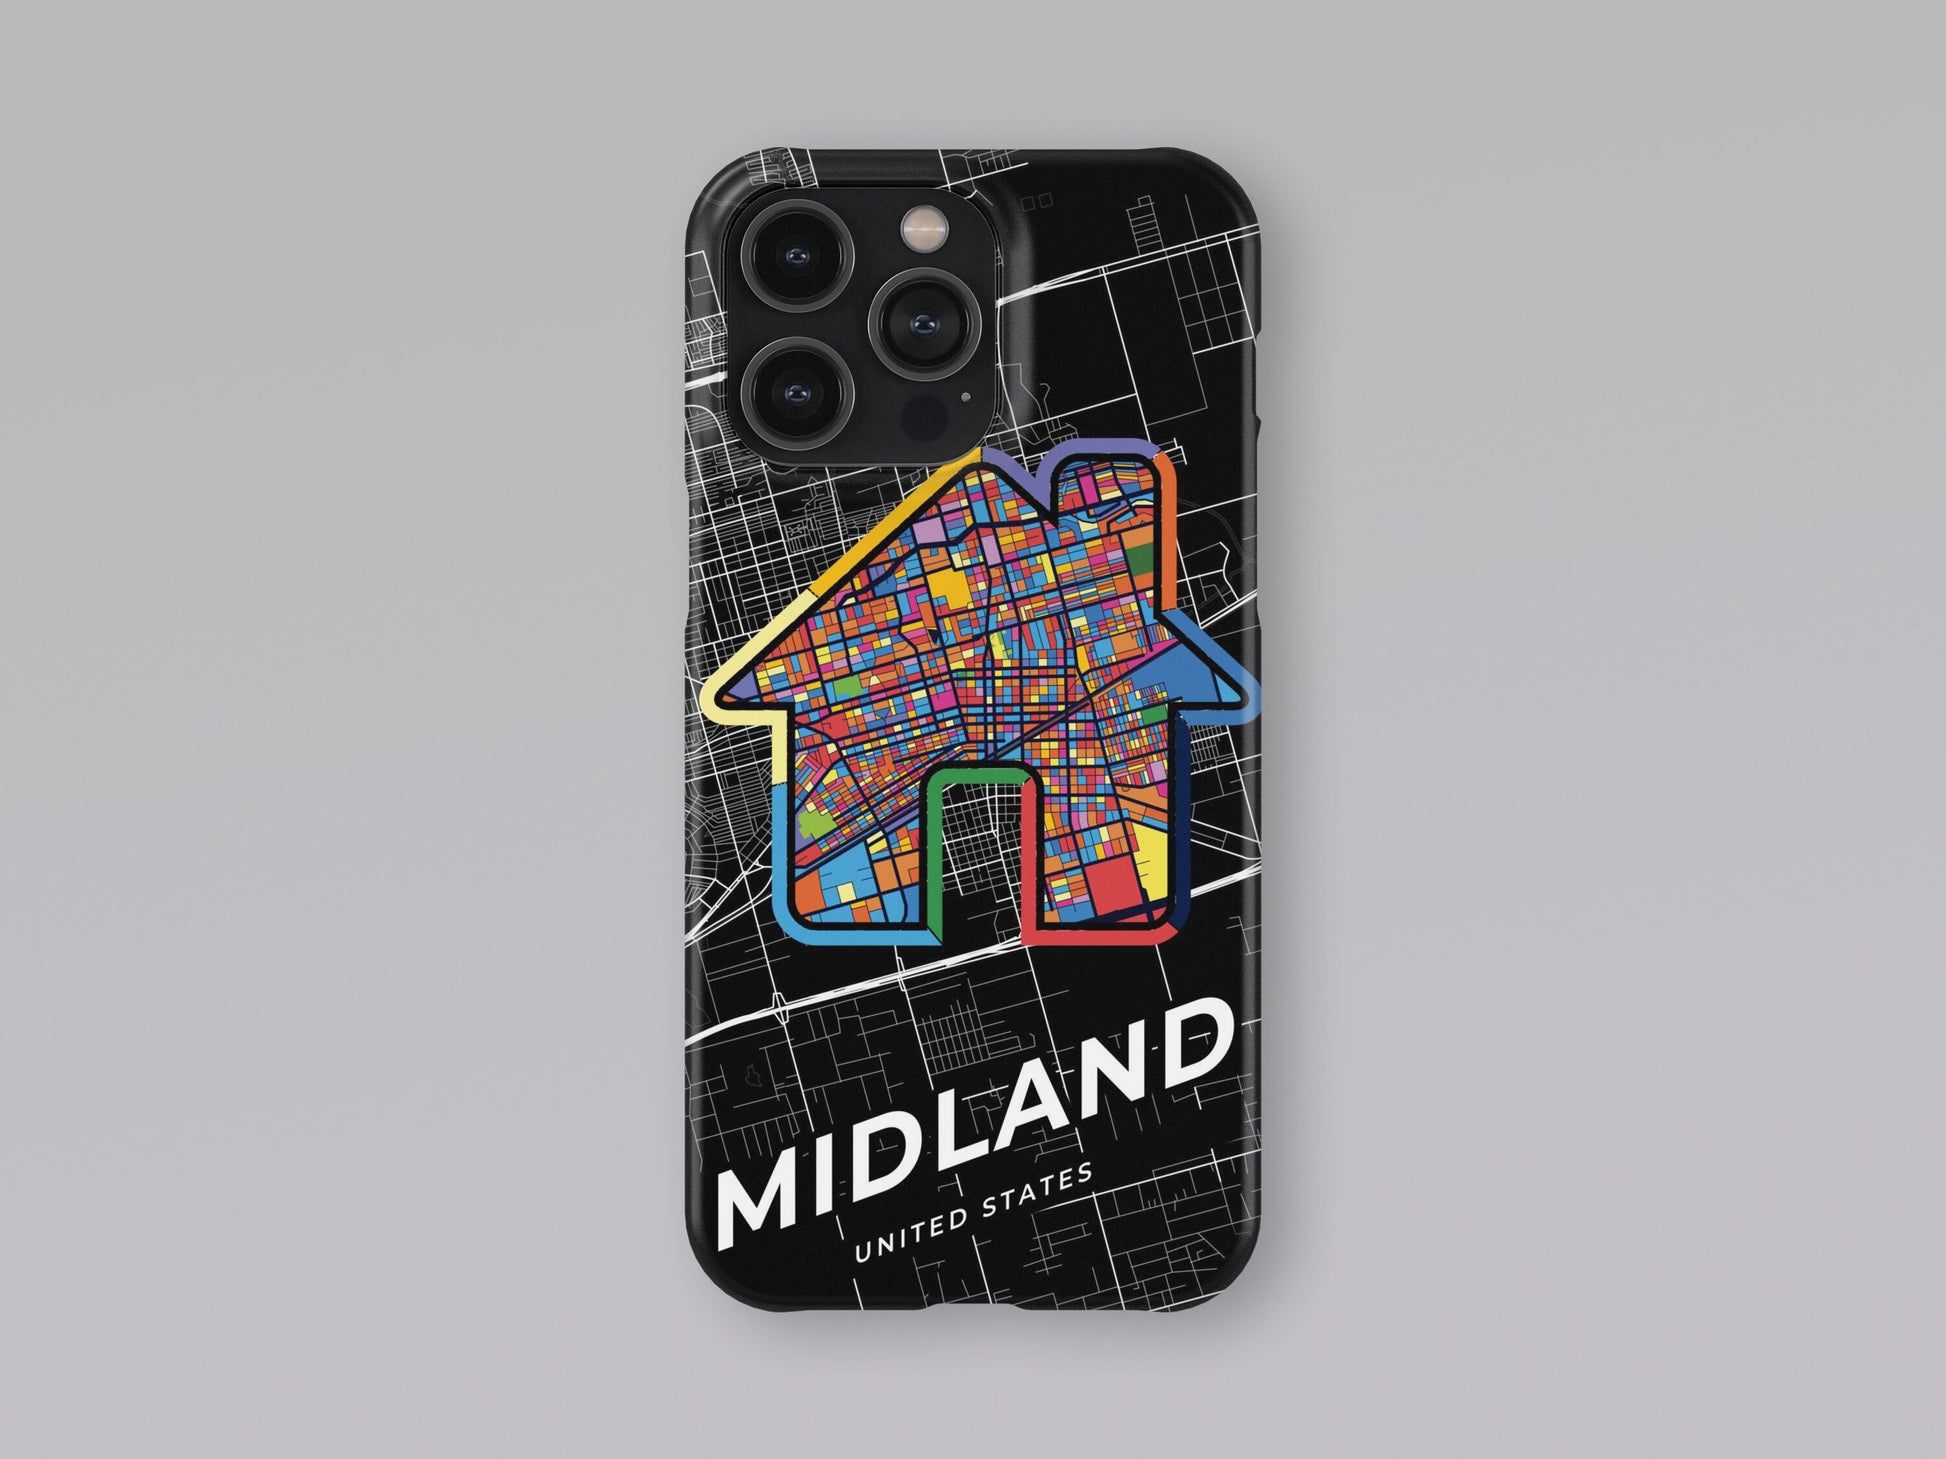 Midland Texas slim phone case with colorful icon 3